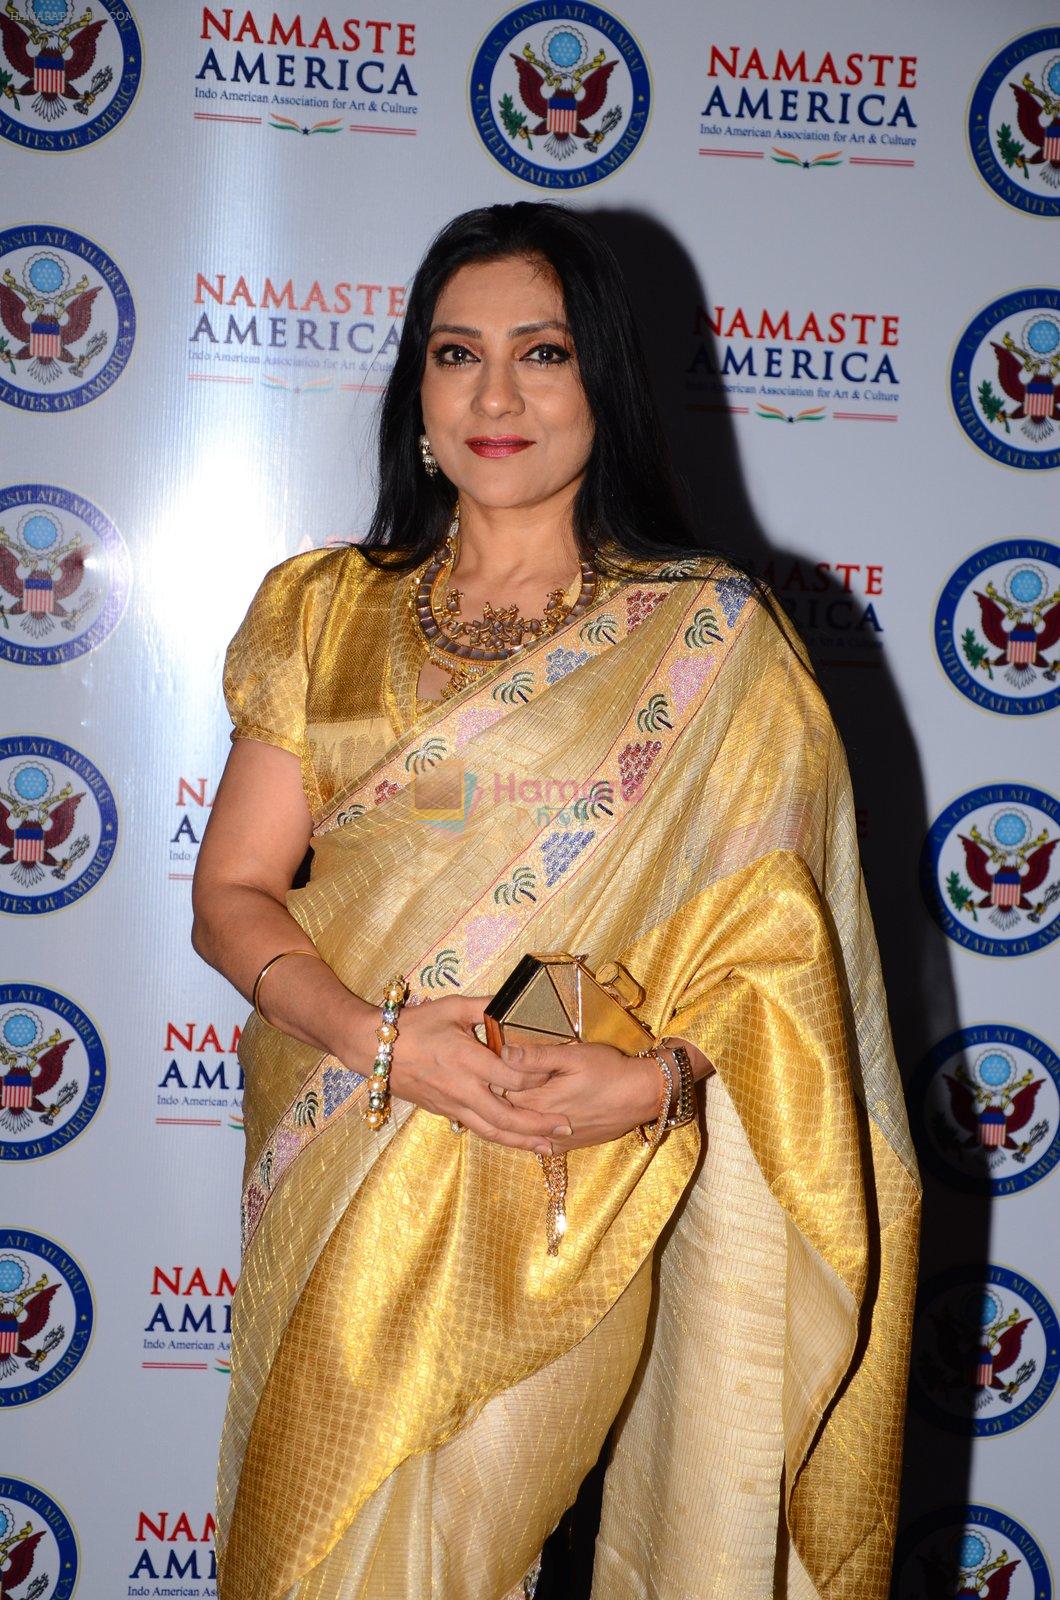 Aarti Surendranath at Namaste America for Donald Trump swearing ceremony on 20th Jan 2017